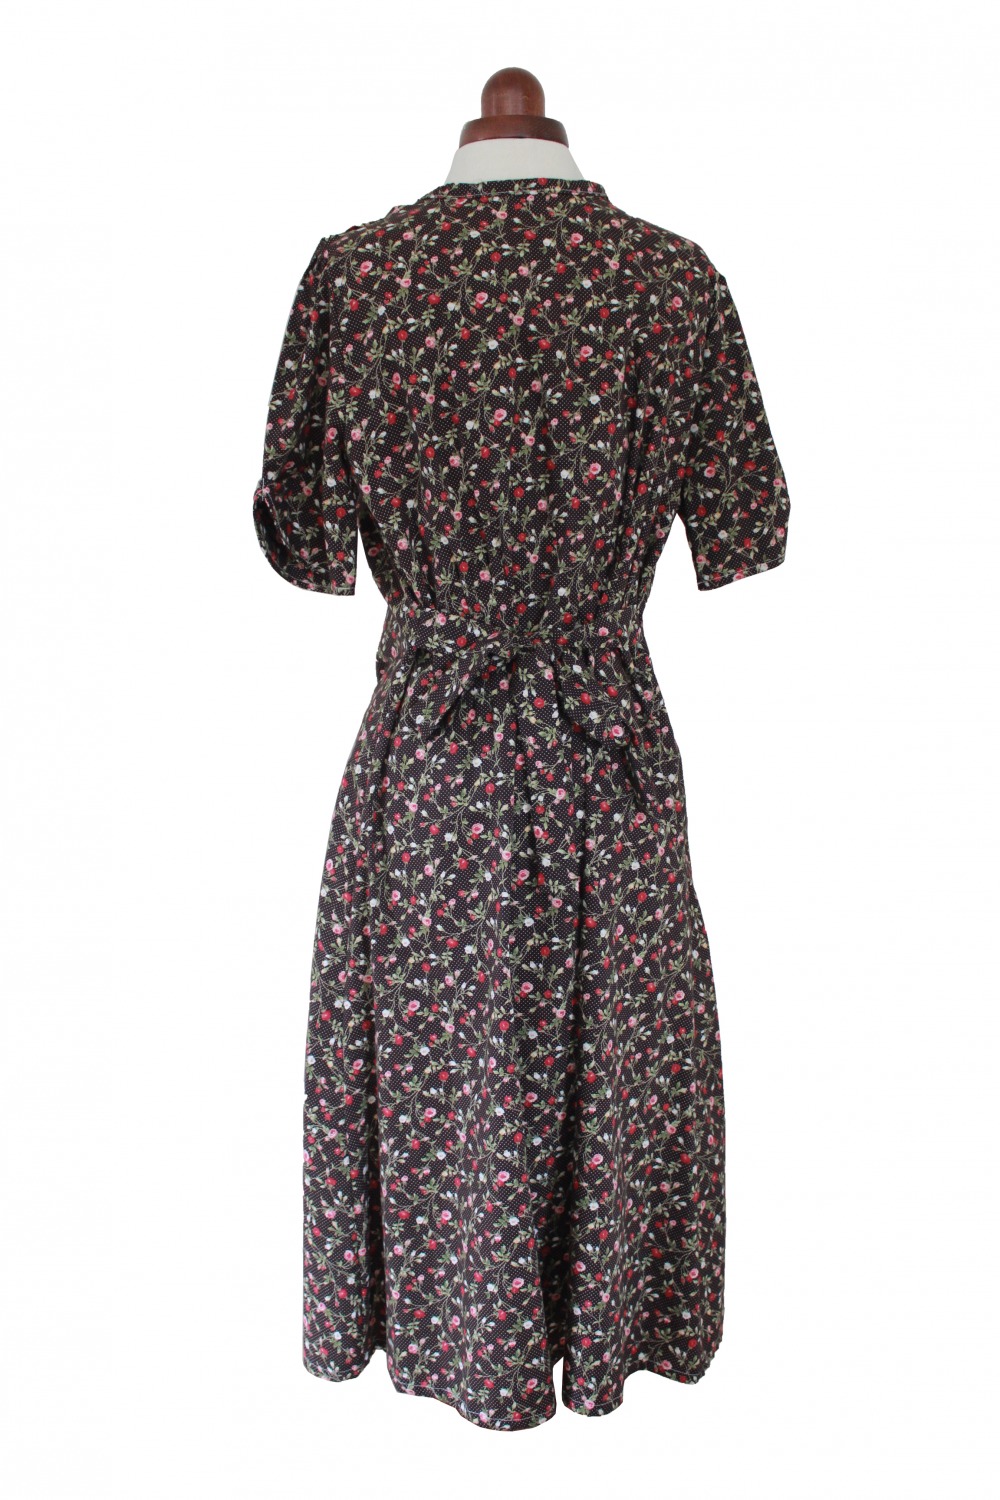 Ladies Wartime Goodwood Costume Size 14 - 16 Image